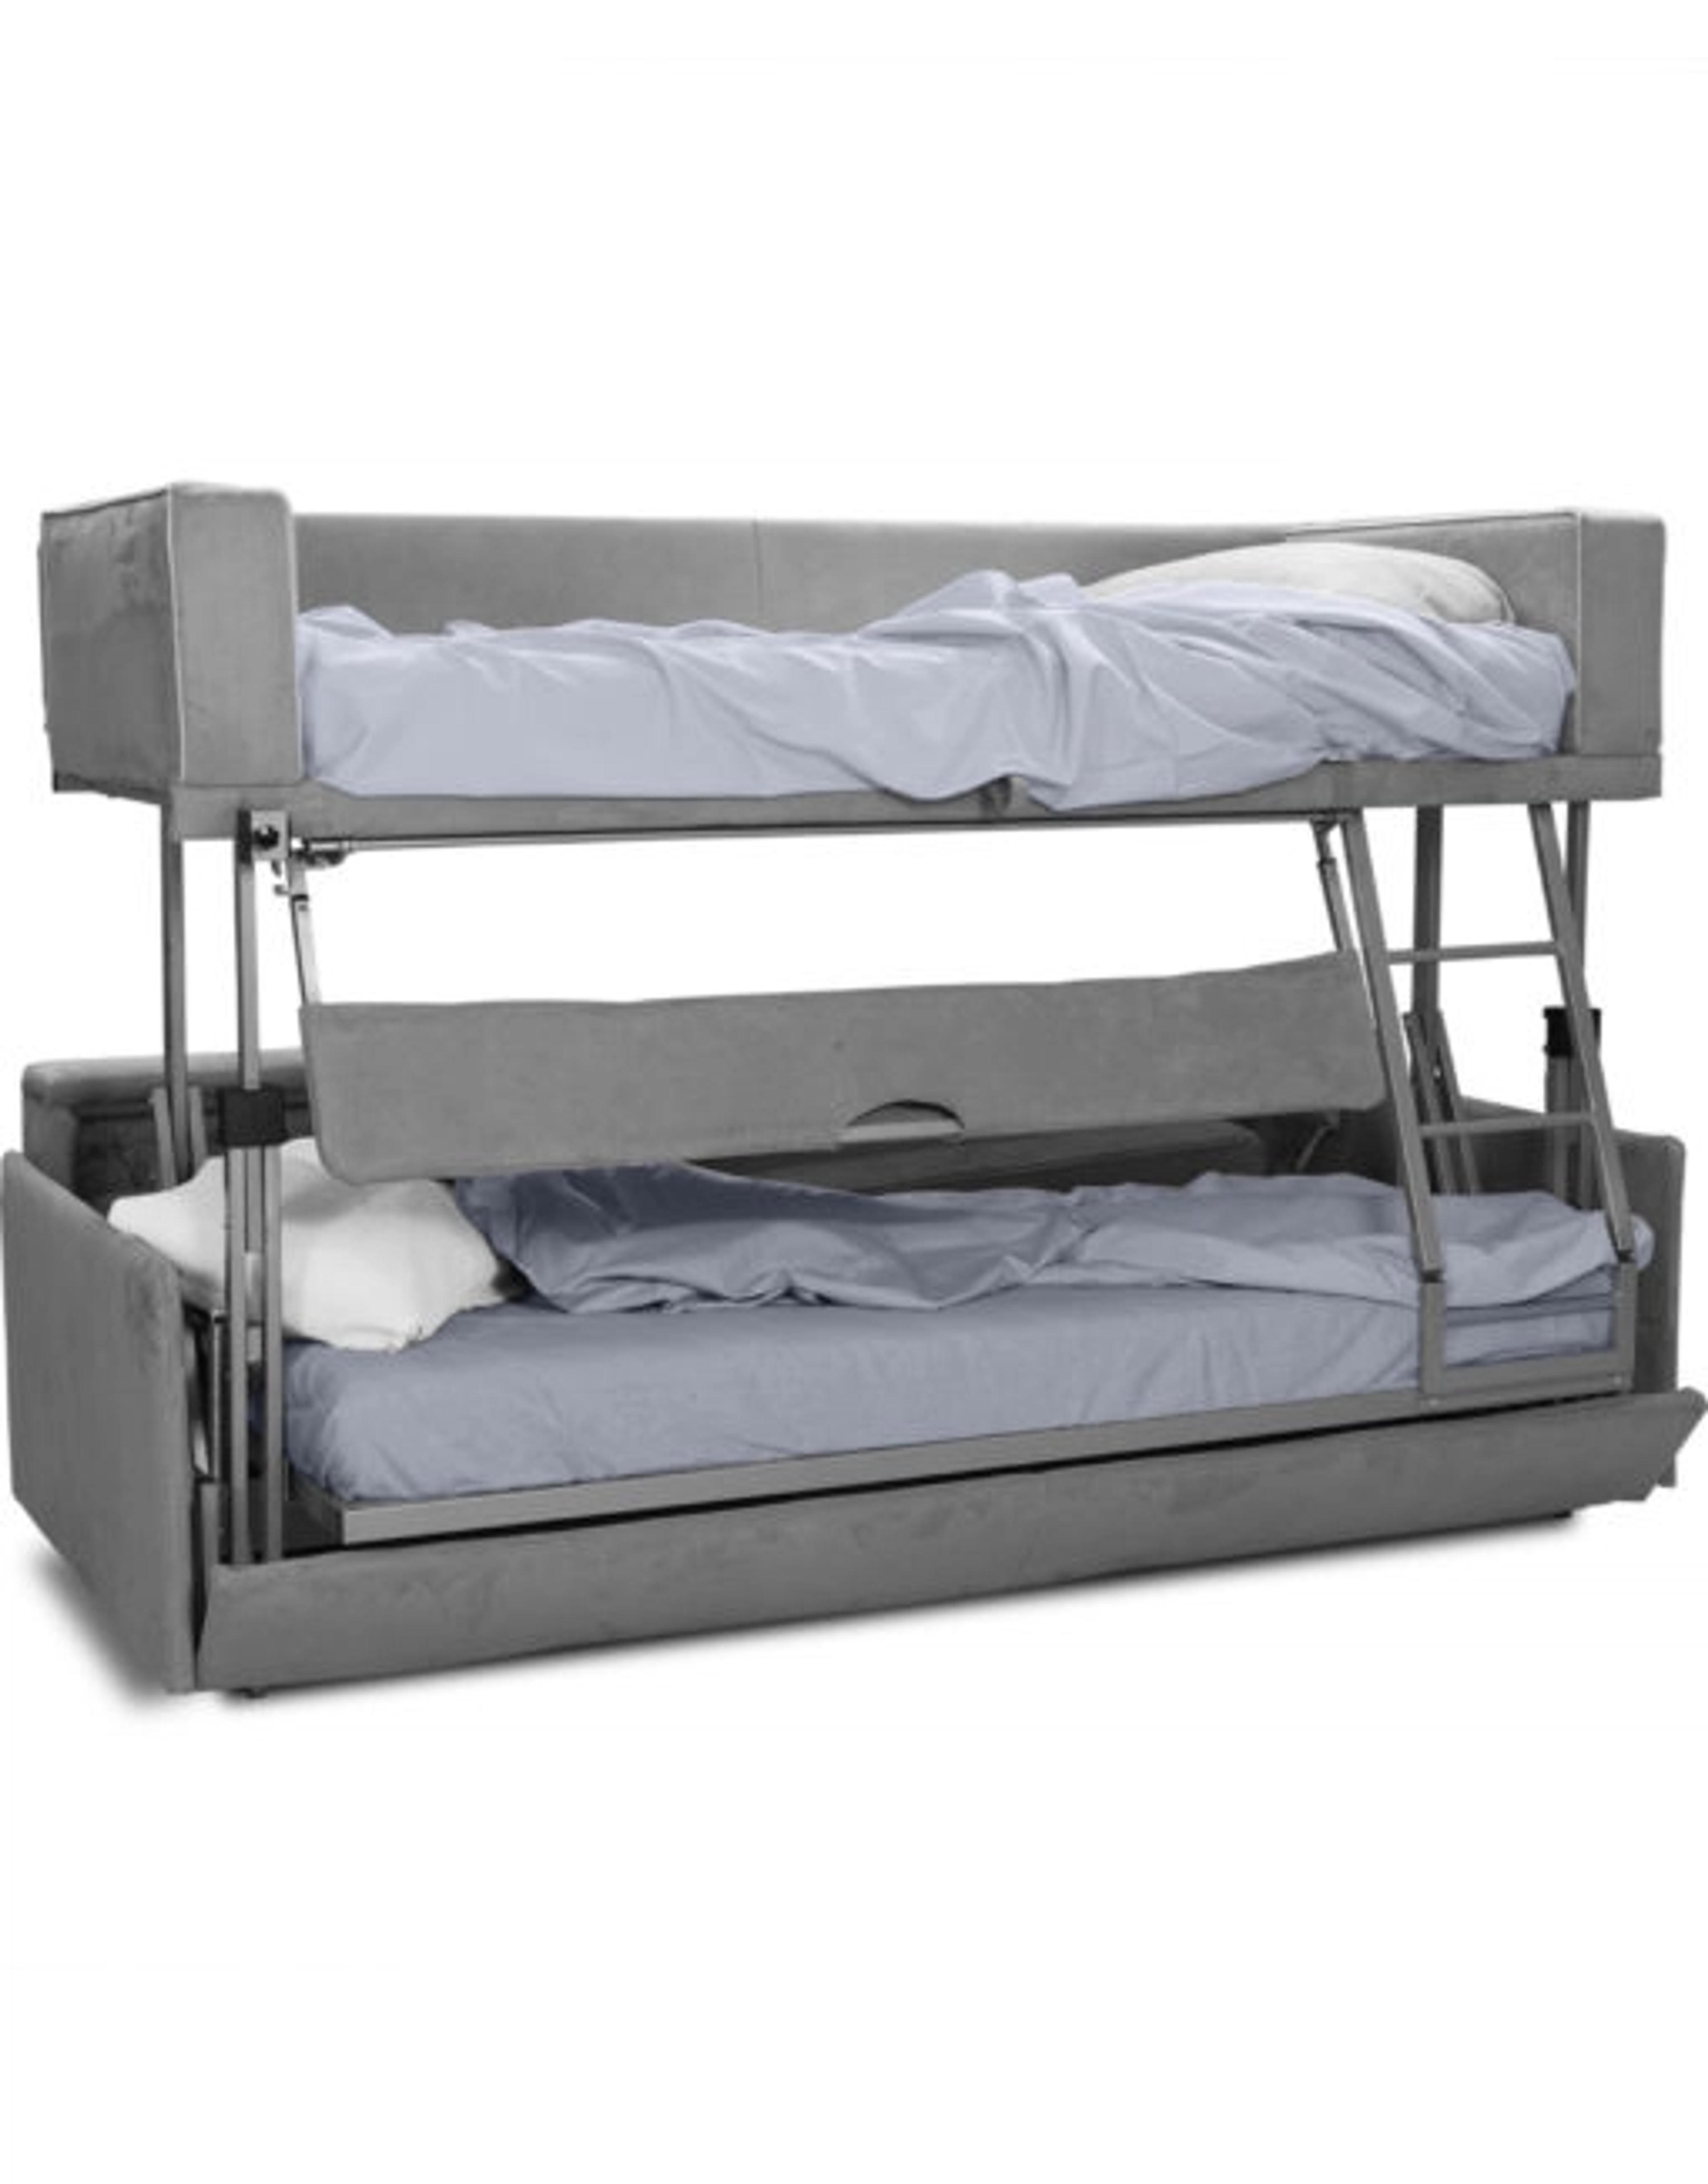 The Dormire V2 - Bunk Bed Couch Transformer - Expand Furniture - Folding Tables, Smarter Wall Beds, Space Savers